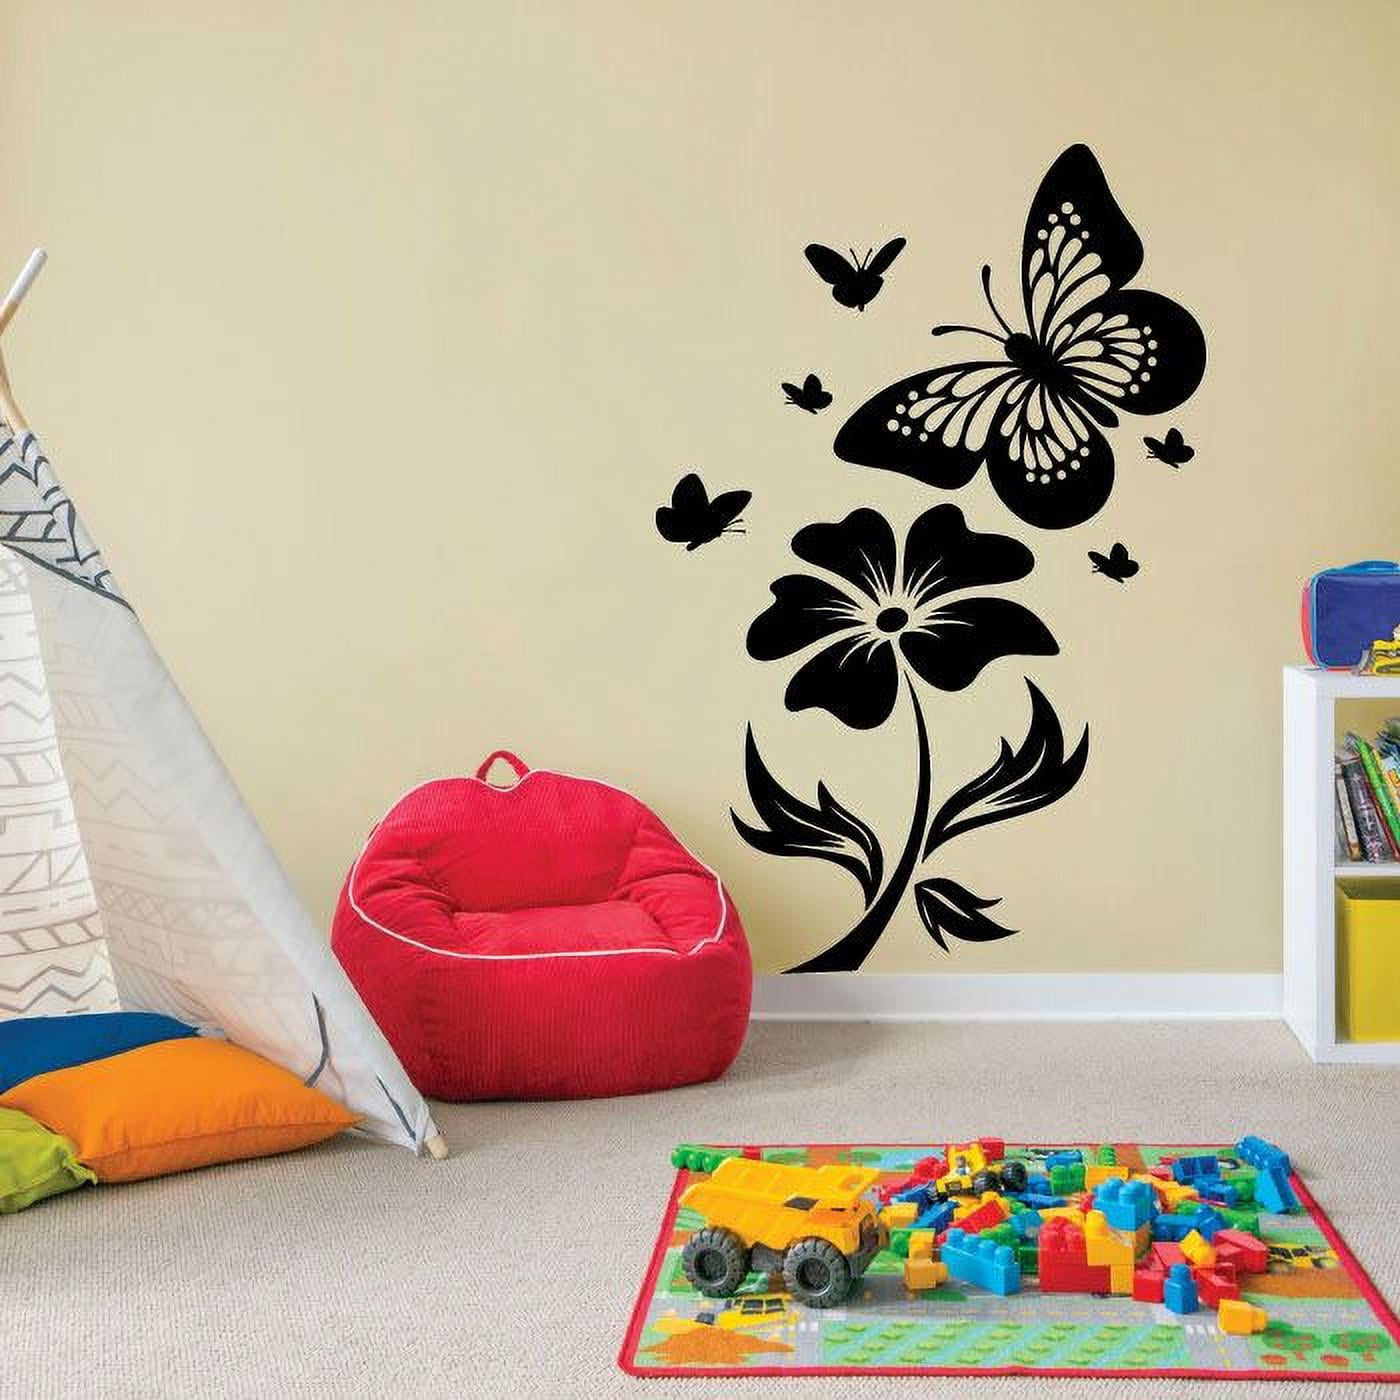 Colourful Butterfly Silhouette Wall Art Vinyl Stickers Decals Pack of 25 